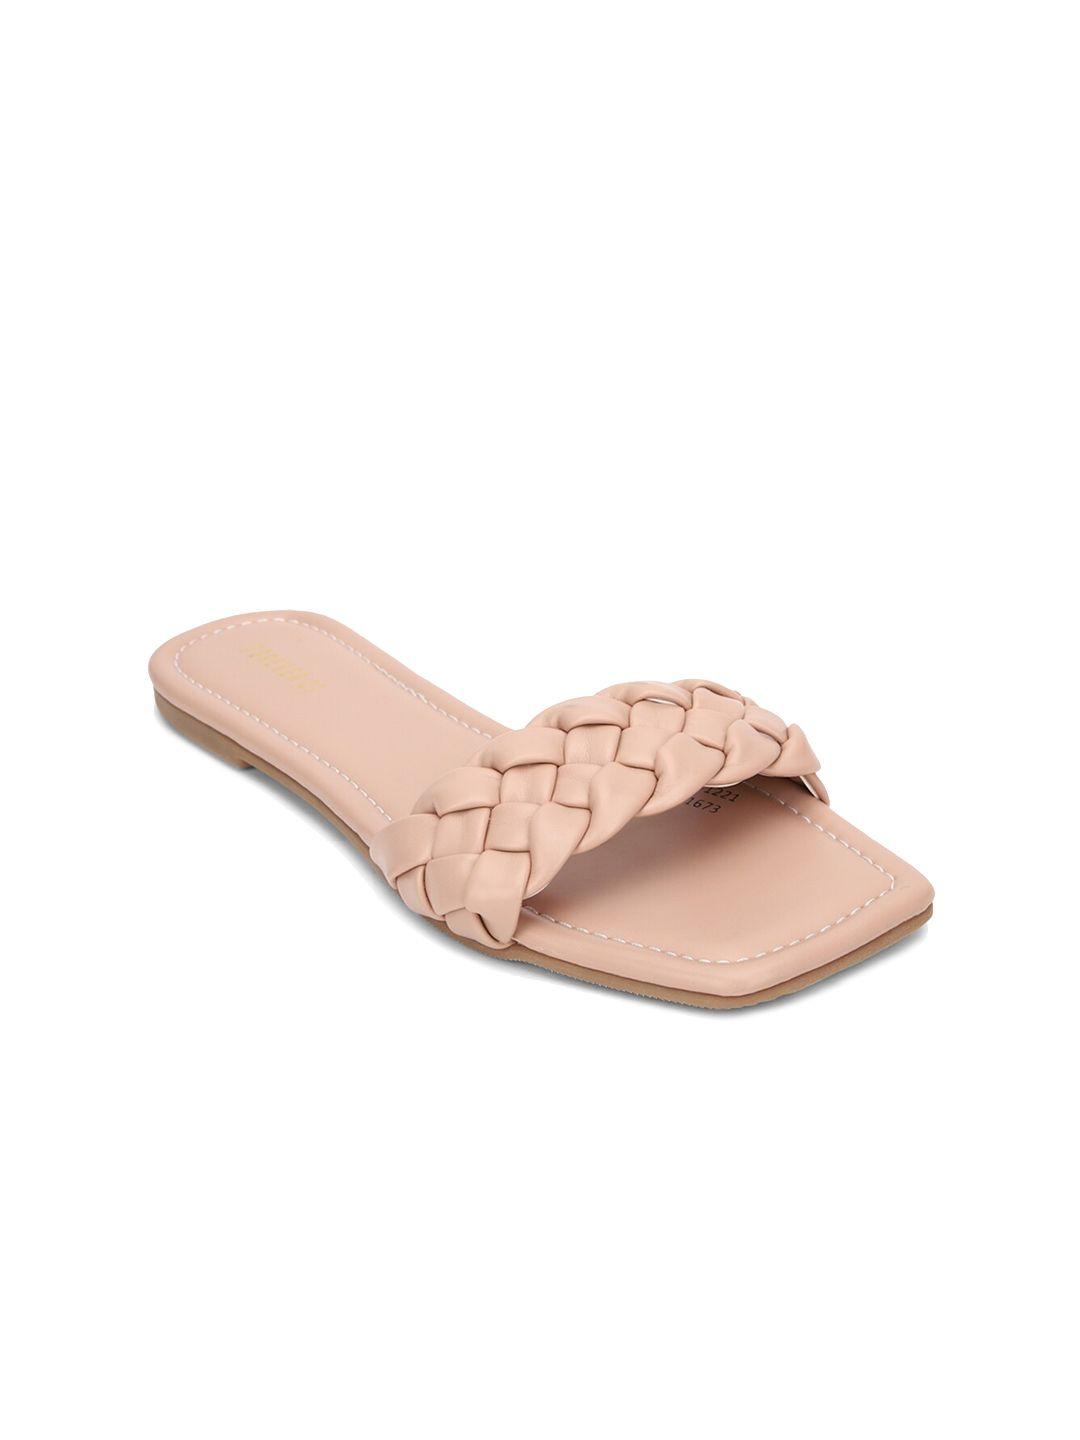 forever-21-women-nude-coloured-open-toe-flats